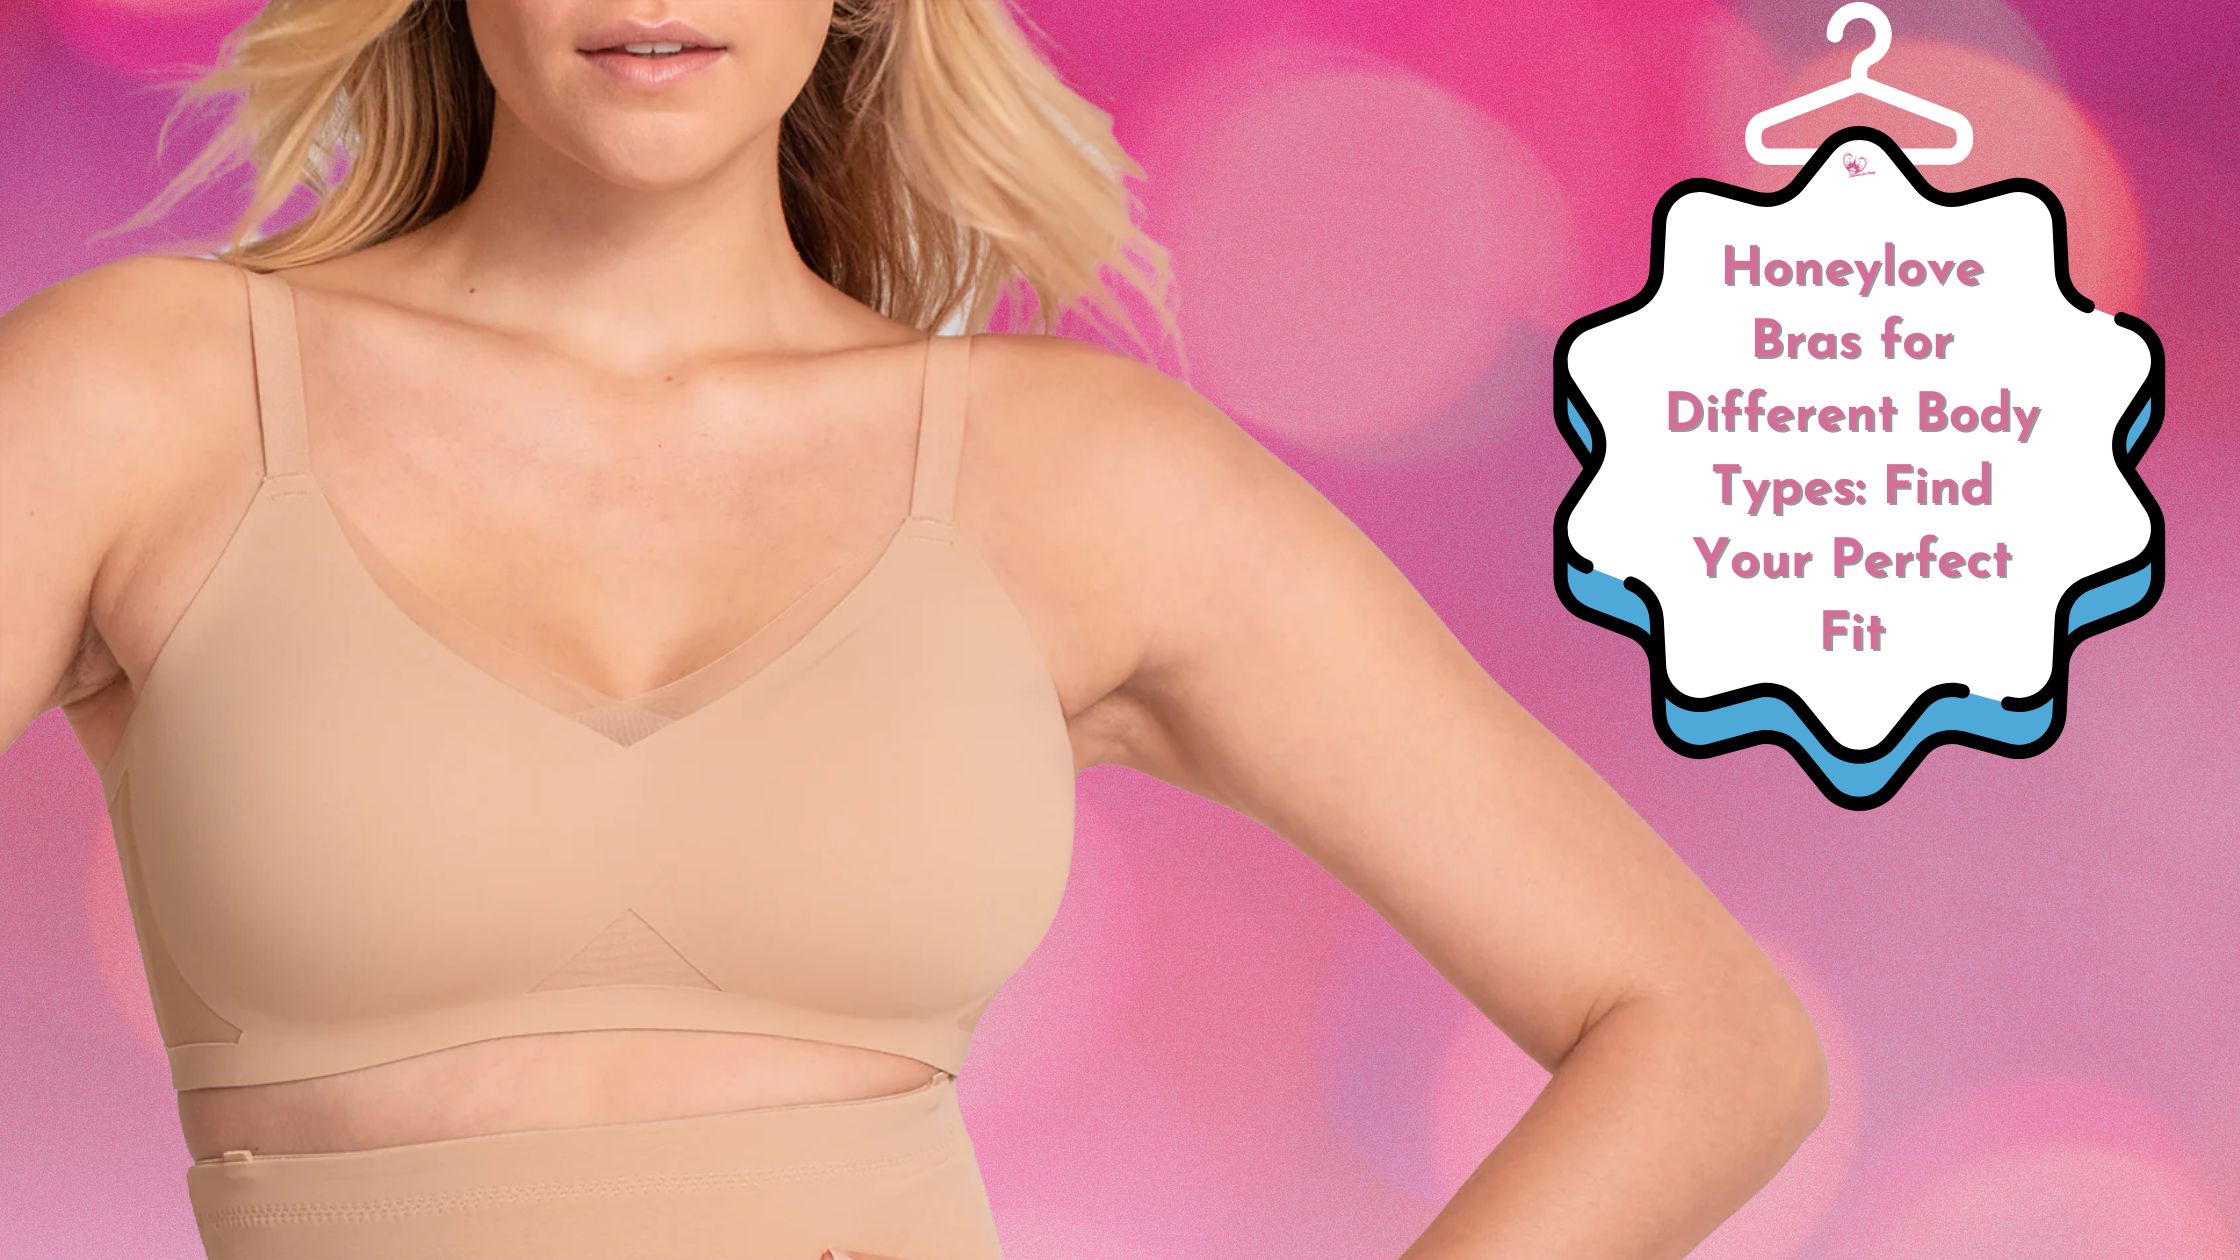 Honeylove Bras for Different Body Types: Find Your Perfect Fit